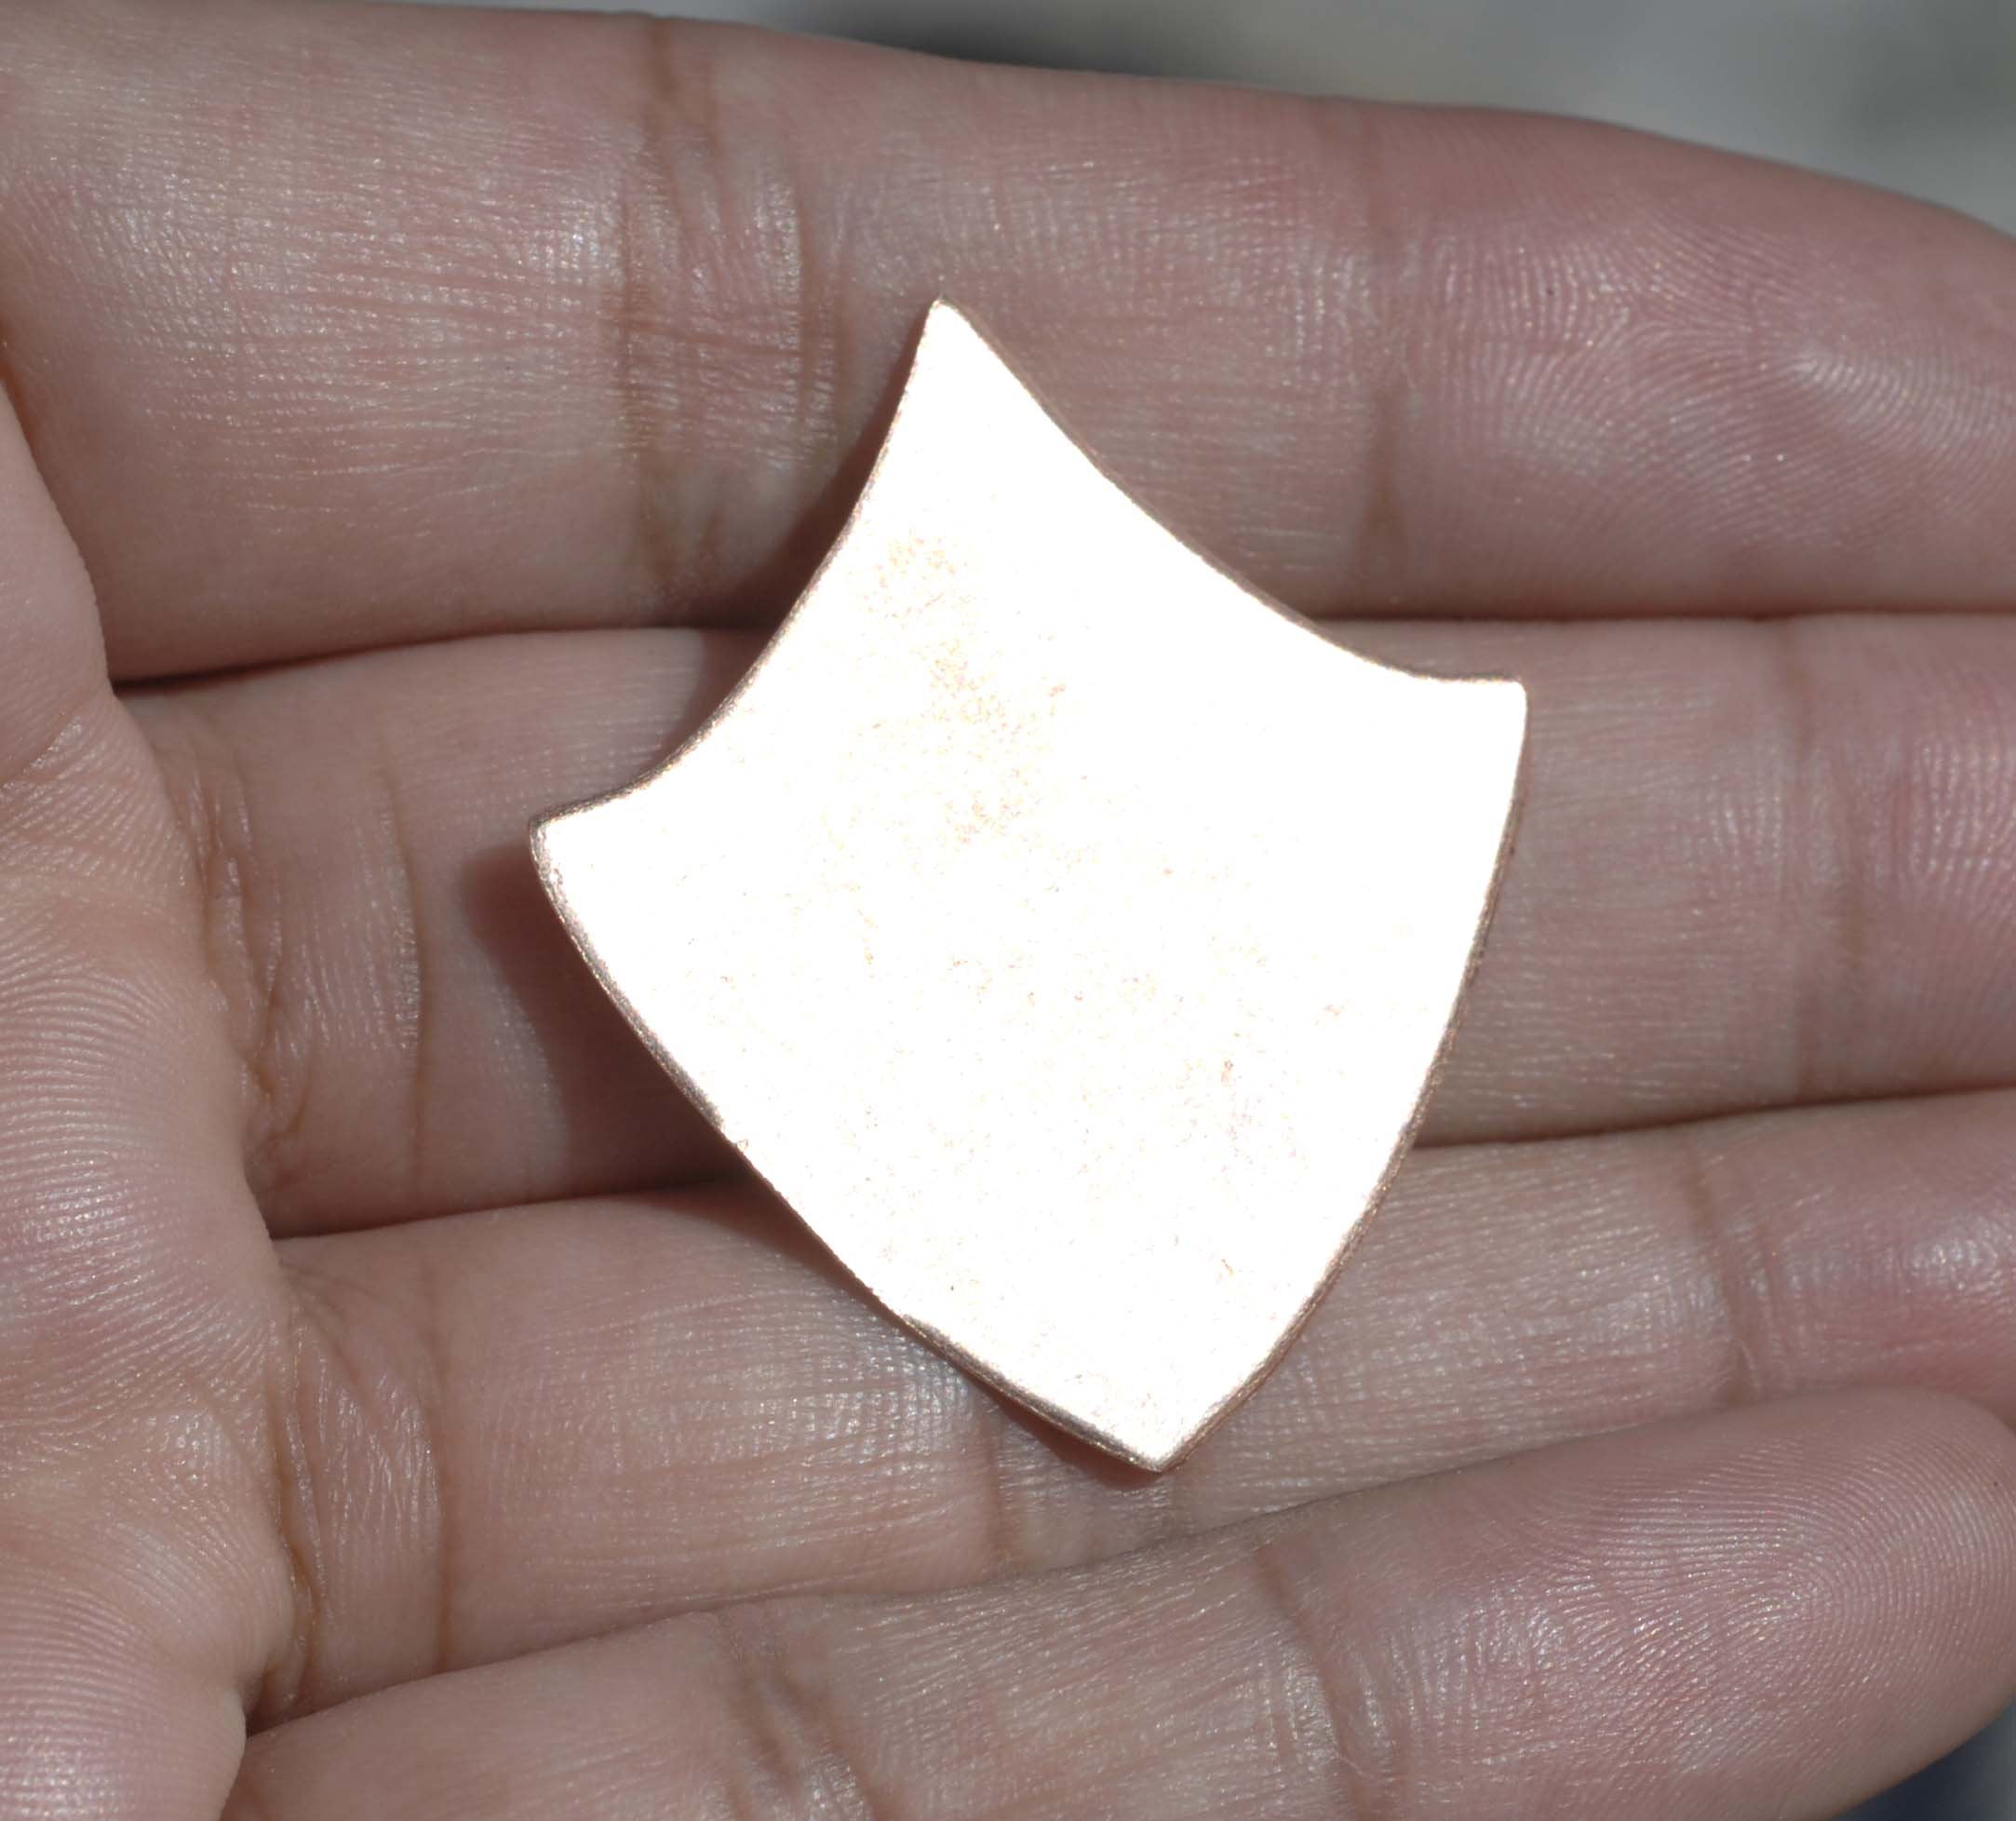 Shield Shape Blanks for Earrings Enameling Metalworking Polished Blanks Variety of Metals, 4 Pieces